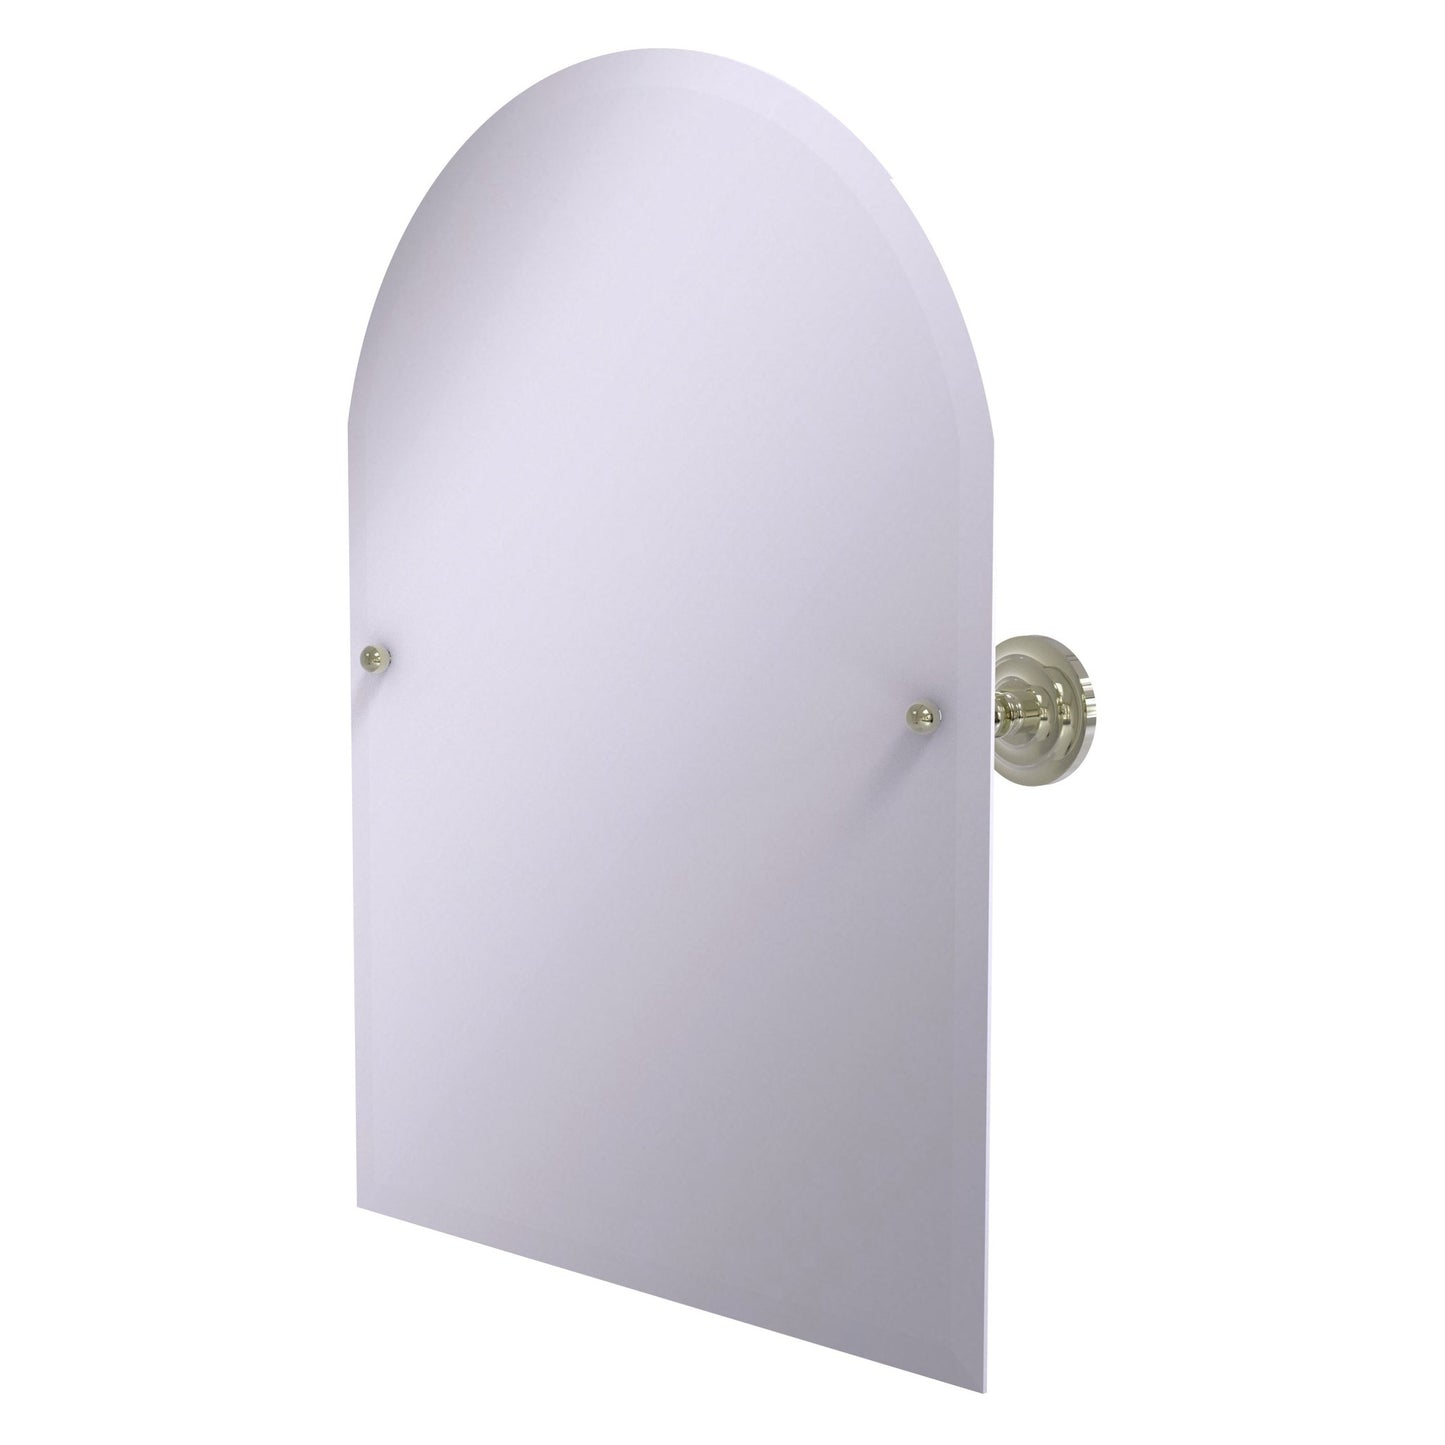 Allied Brass Prestige Que New 21" x 26" Polished Nickel Solid Brass Frameless Arched Top Tilt Mirror With Beveled Edge